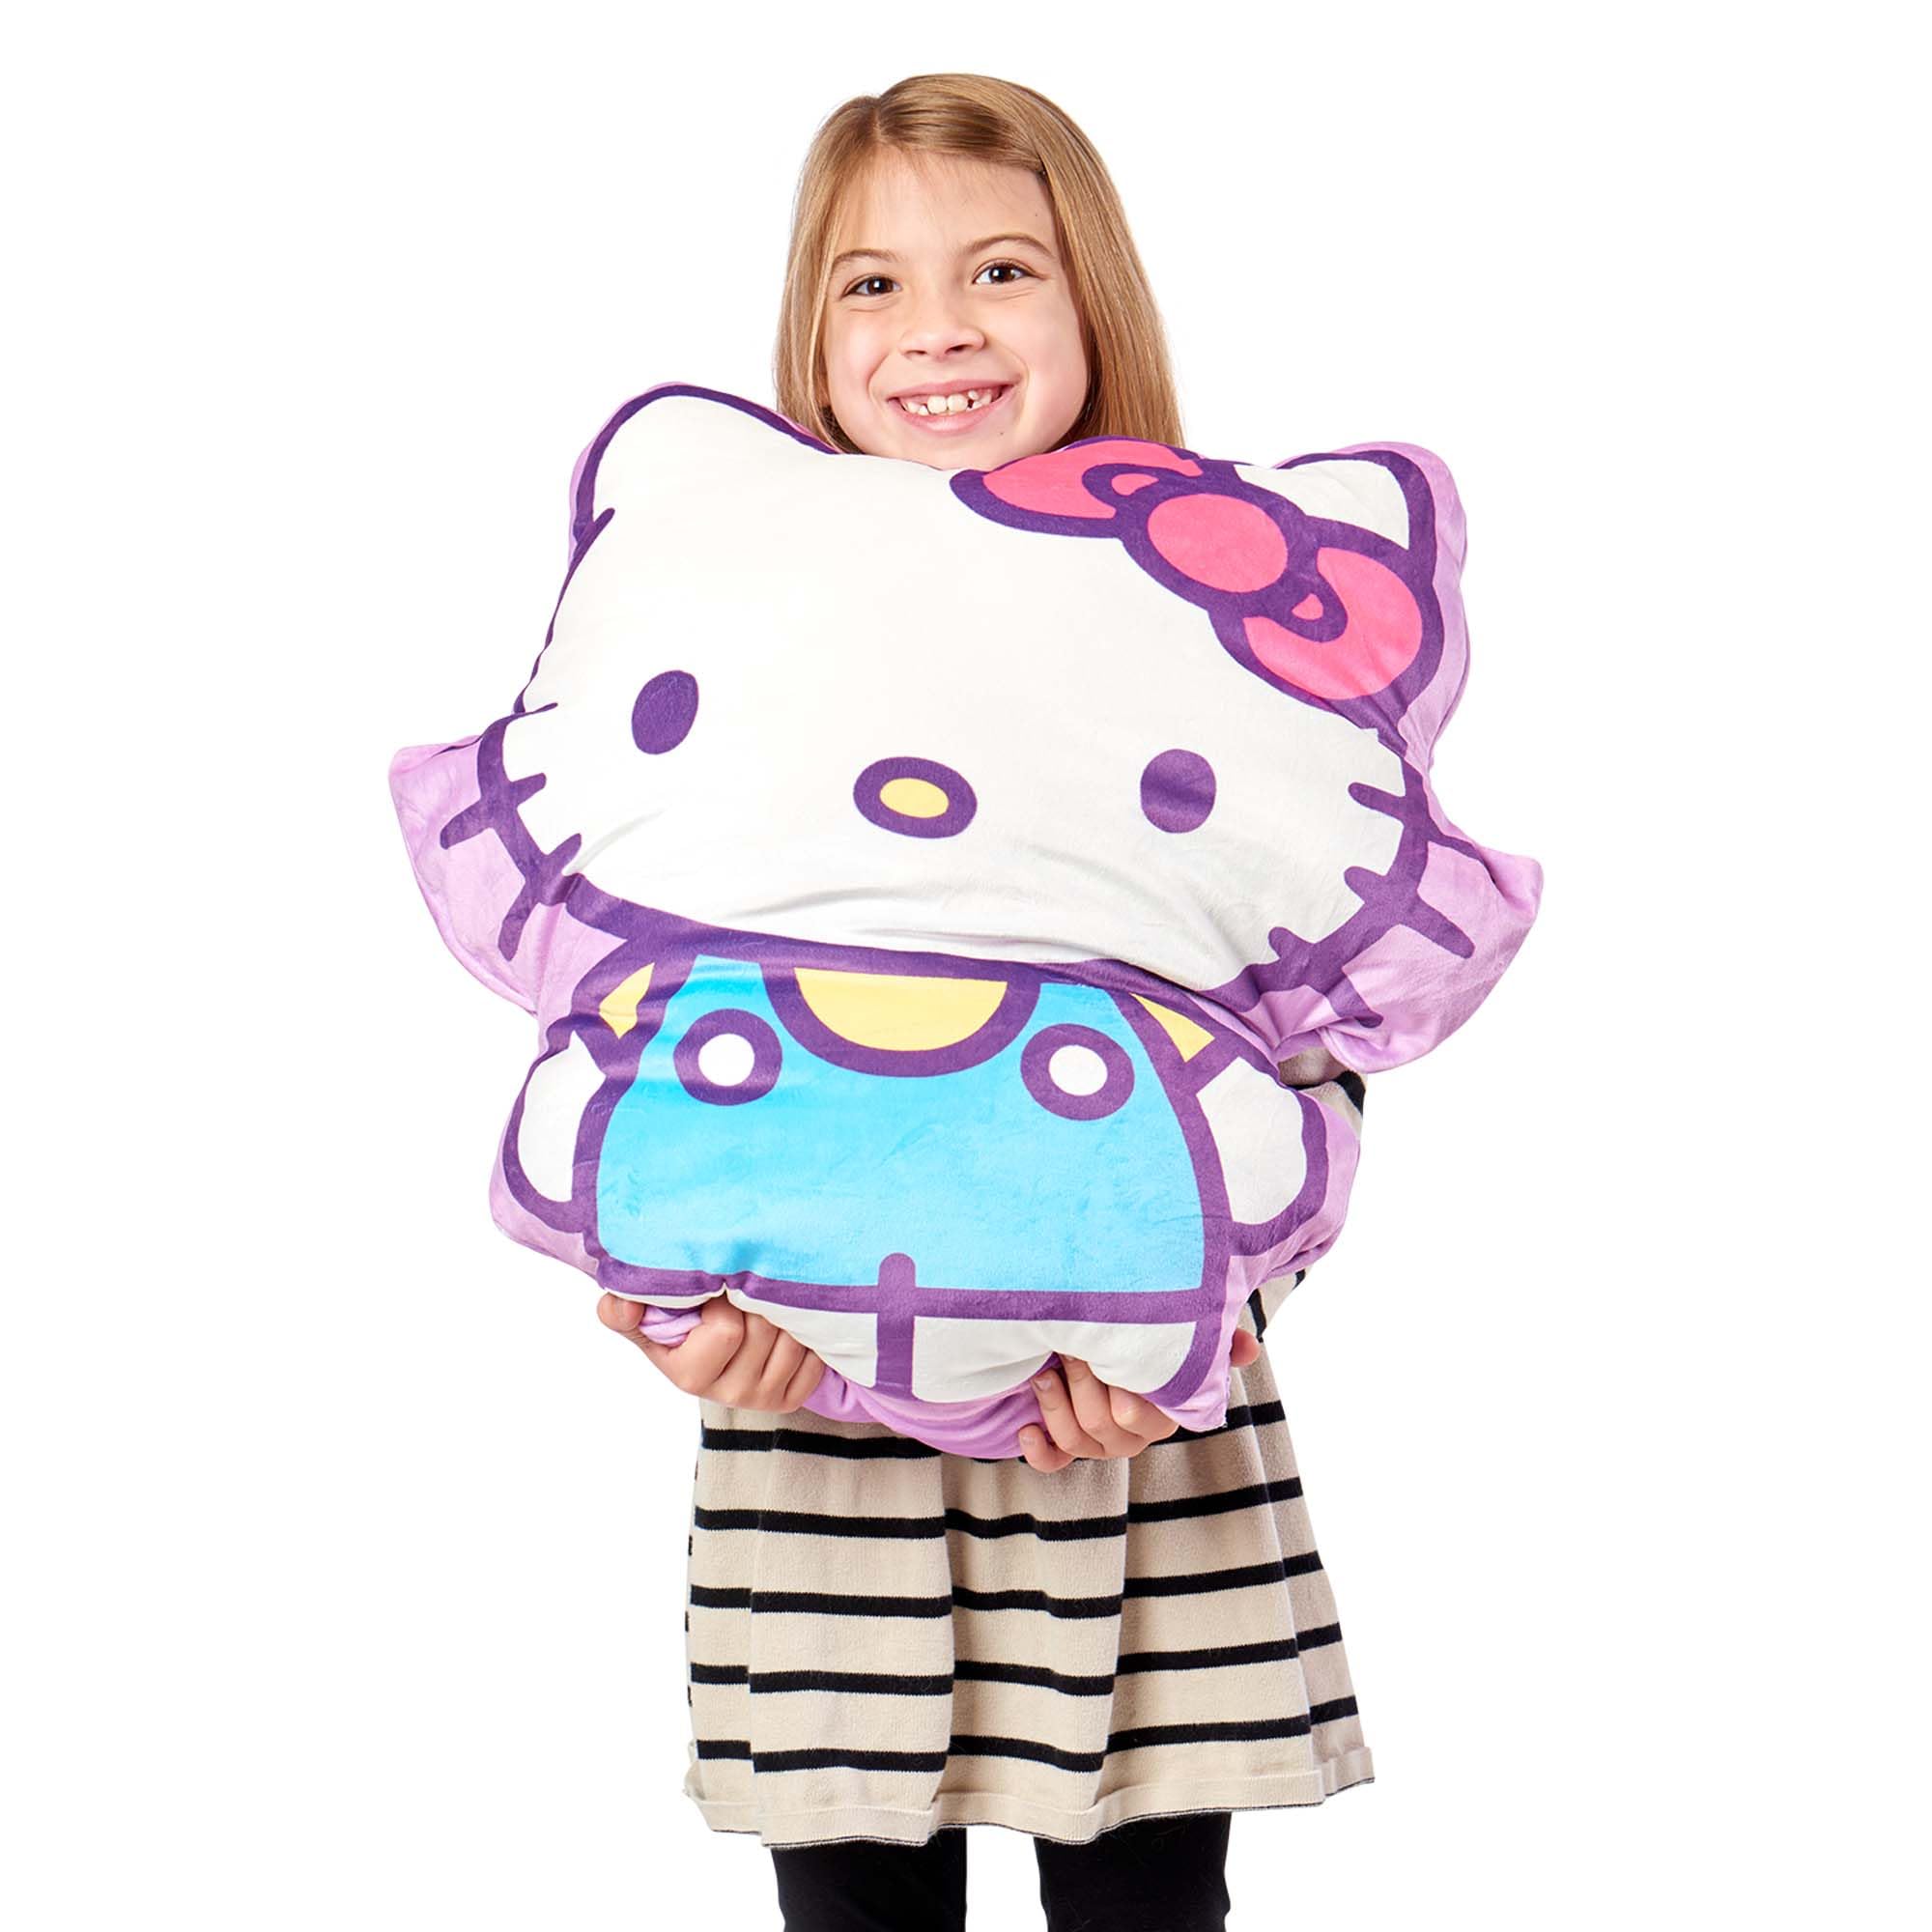 Northwest Hello Kitty Cloud Pal Character Pillow, 23